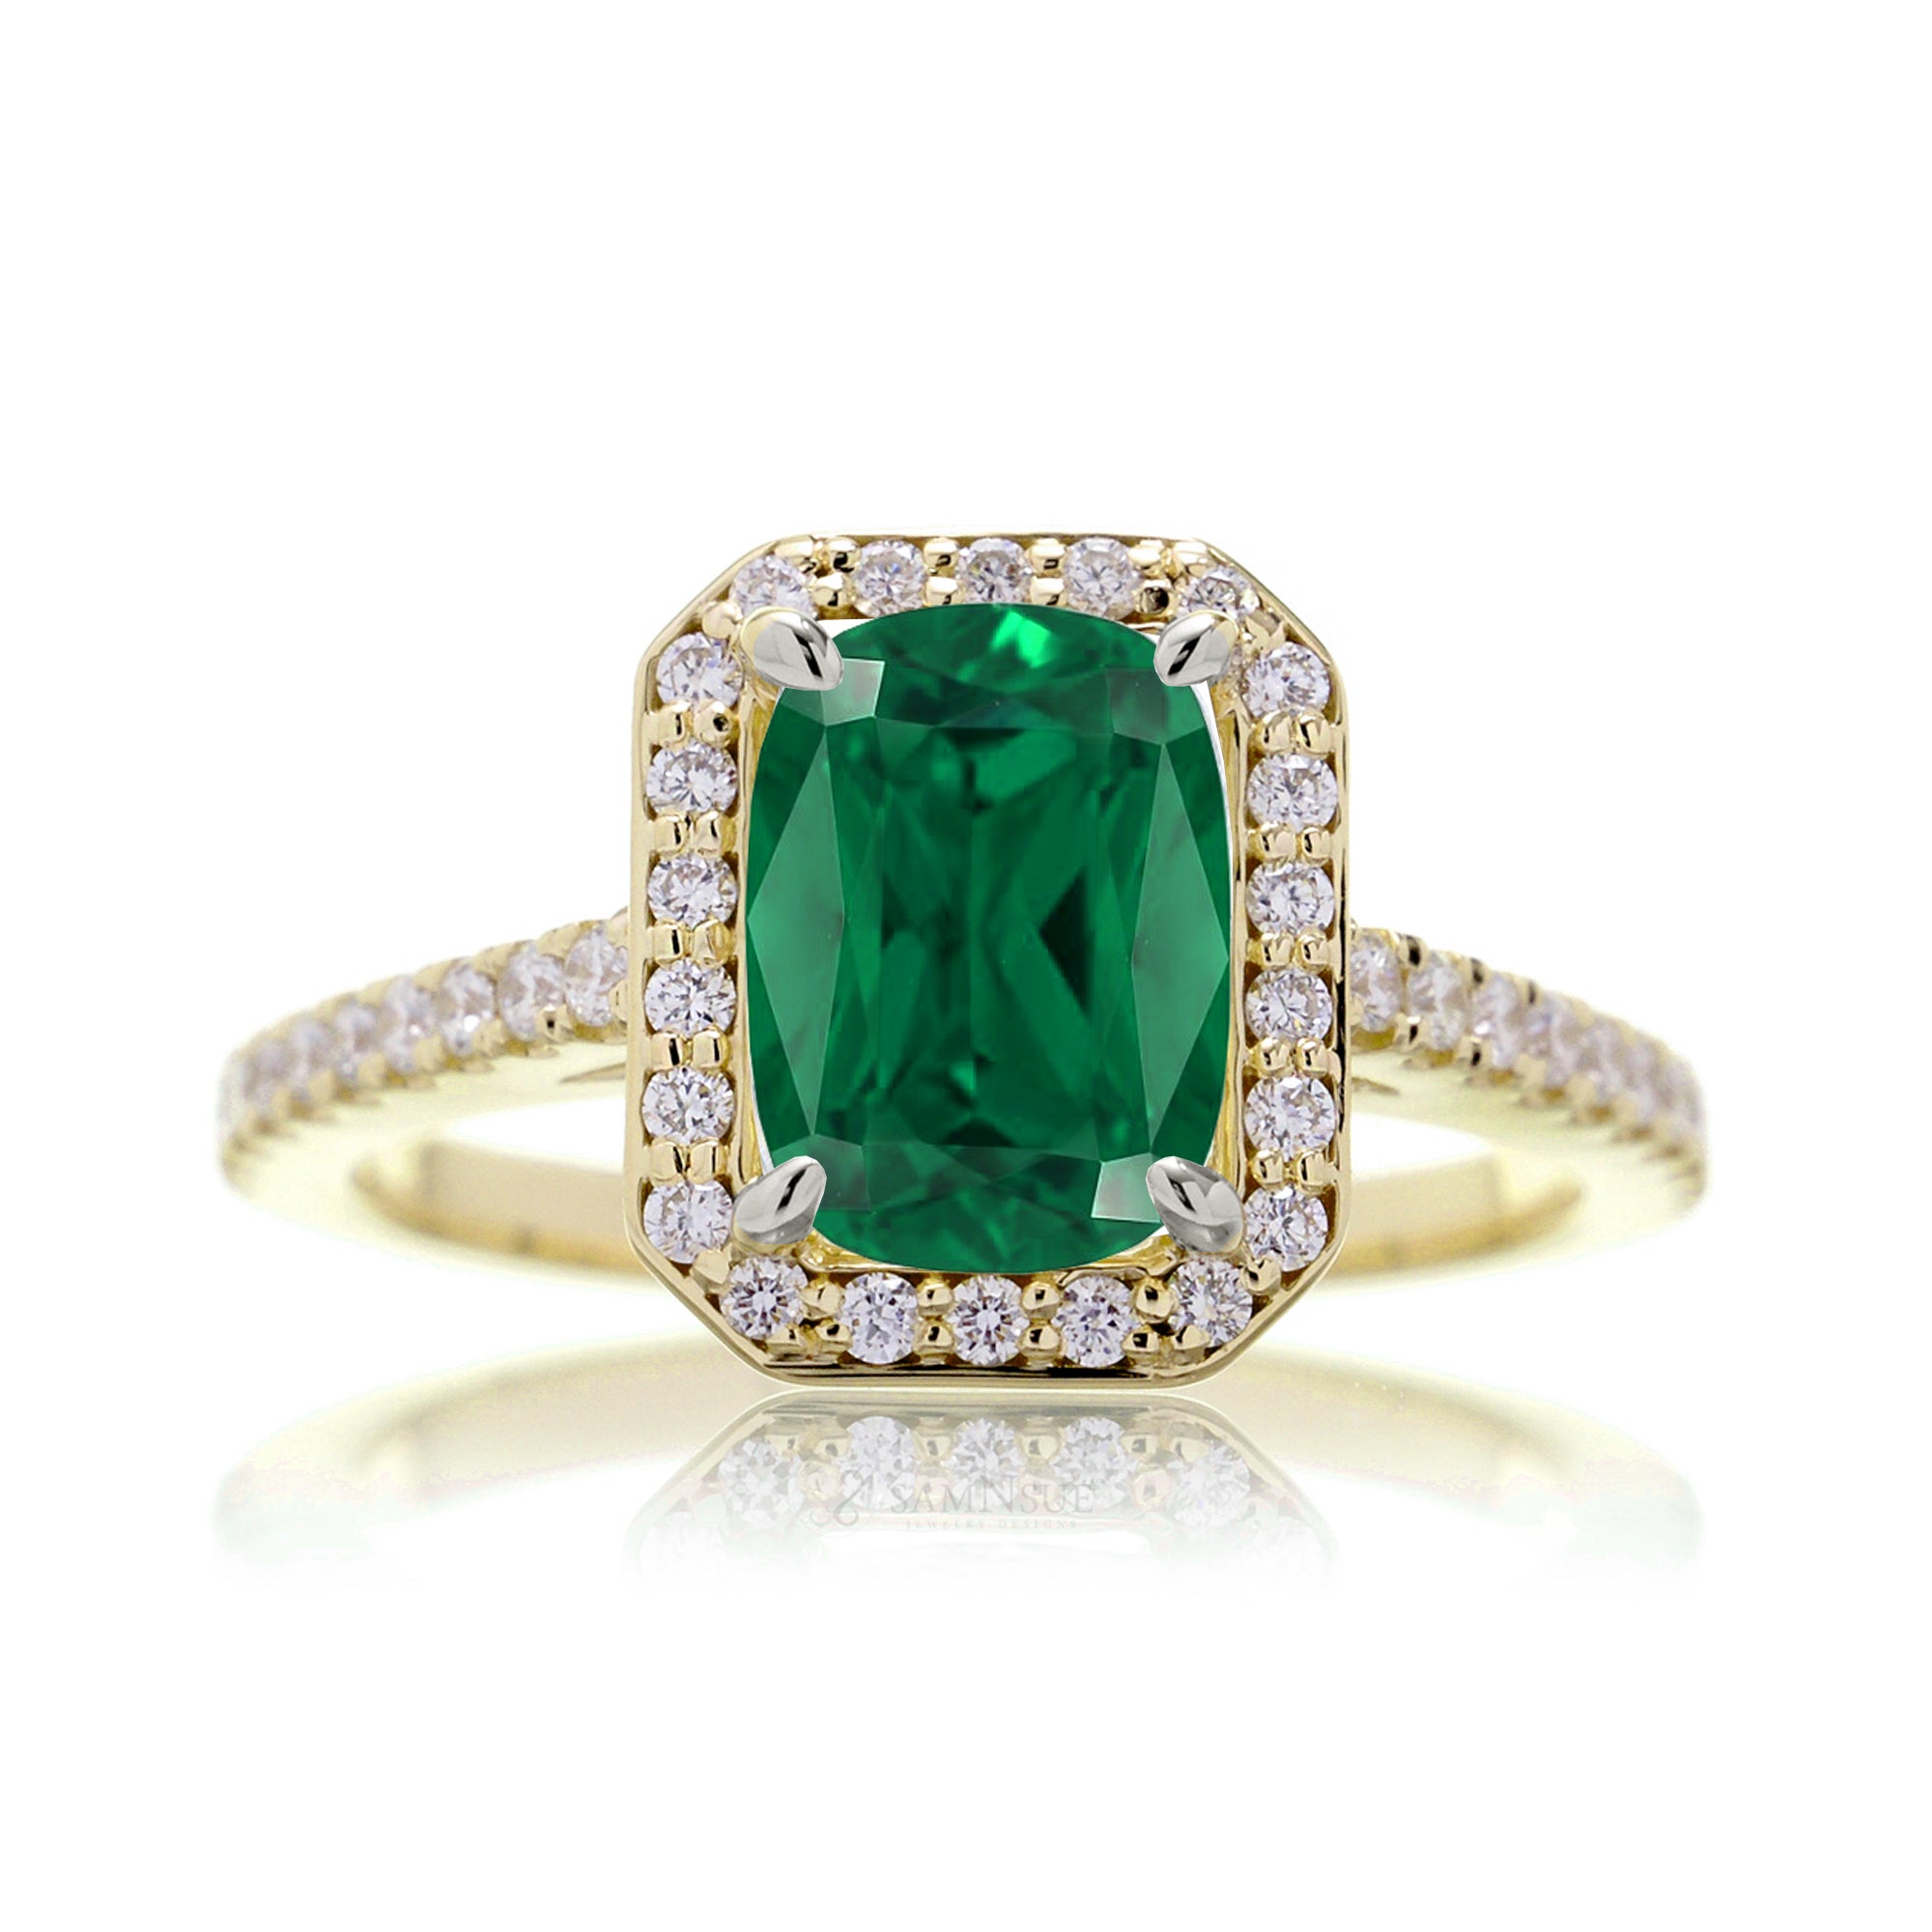 Cushion lab-grown emerald diamond halo cathedral engagement ring - the Steffy yellow gold